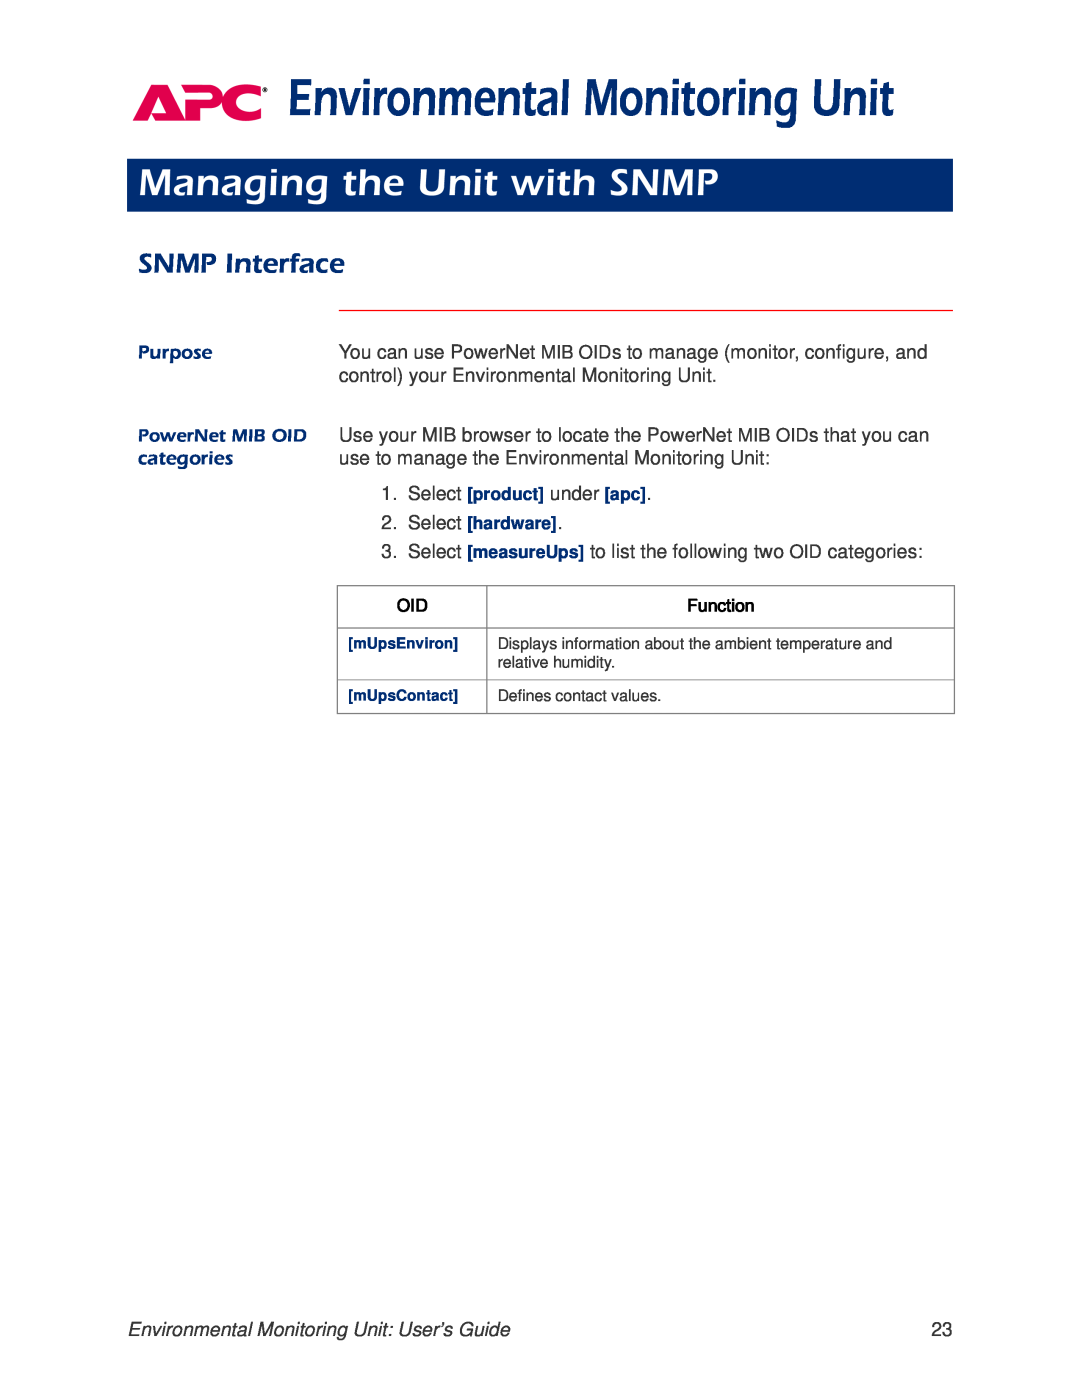 APC AP9312THi manual Managing the Unit with SNMP, SNMP Interface, categories, Environmental Monitoring Unit, Purpose 